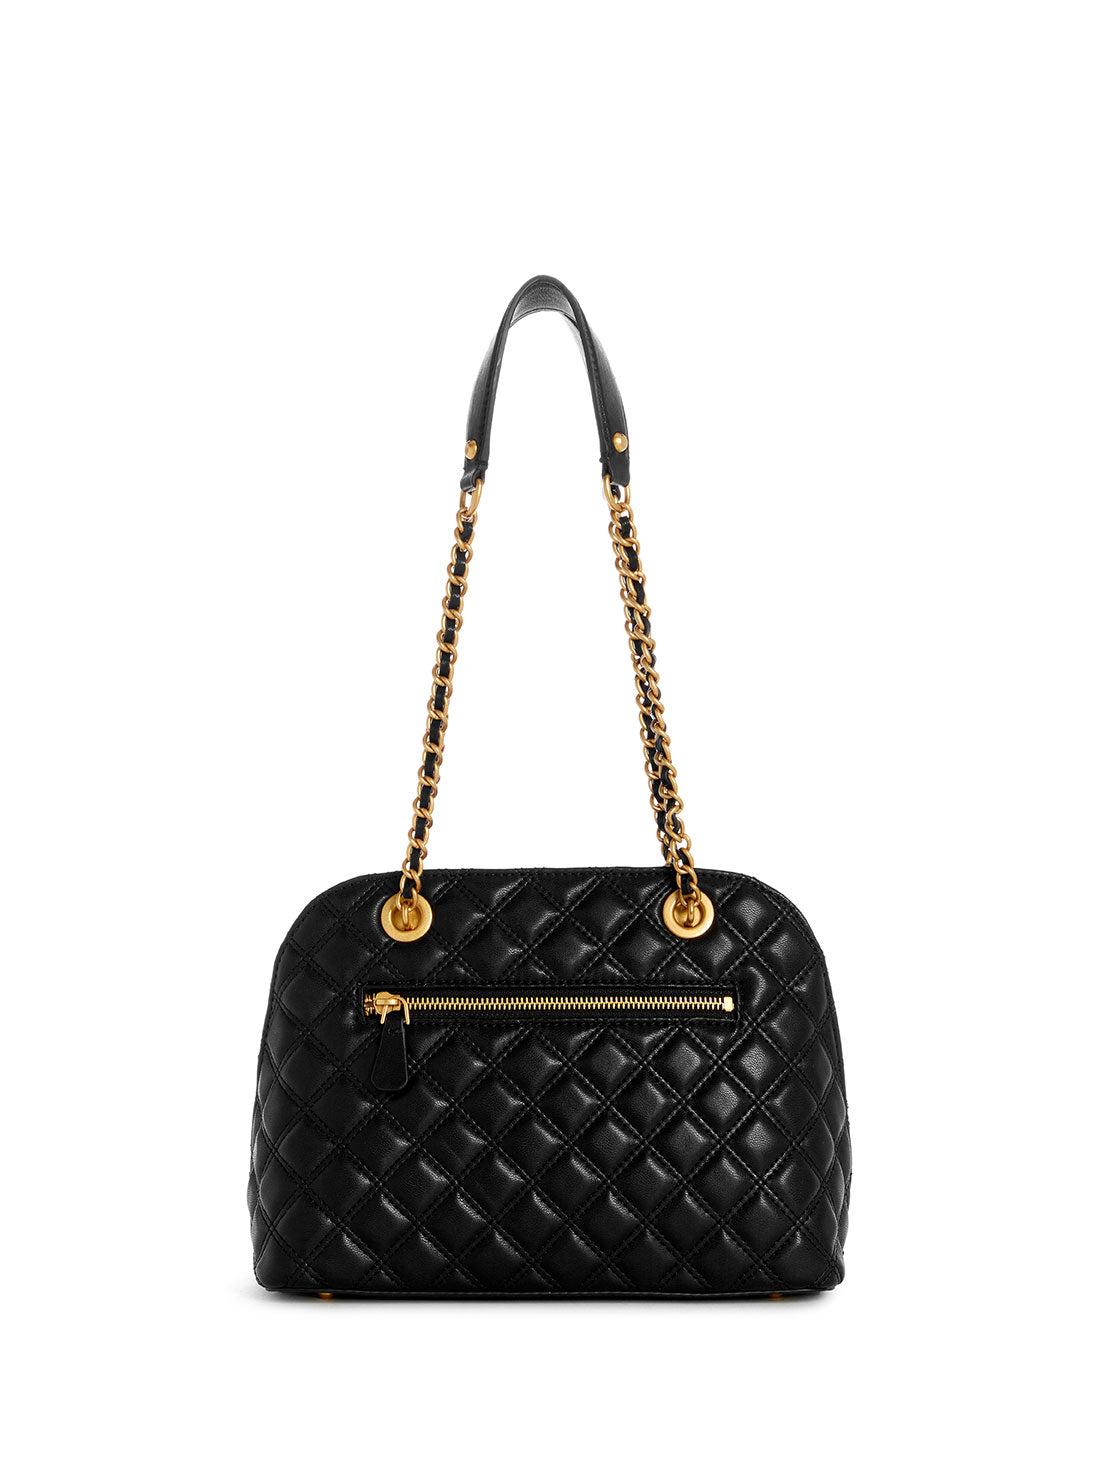 GUESS Black Giully Dome Satchel Bag back view